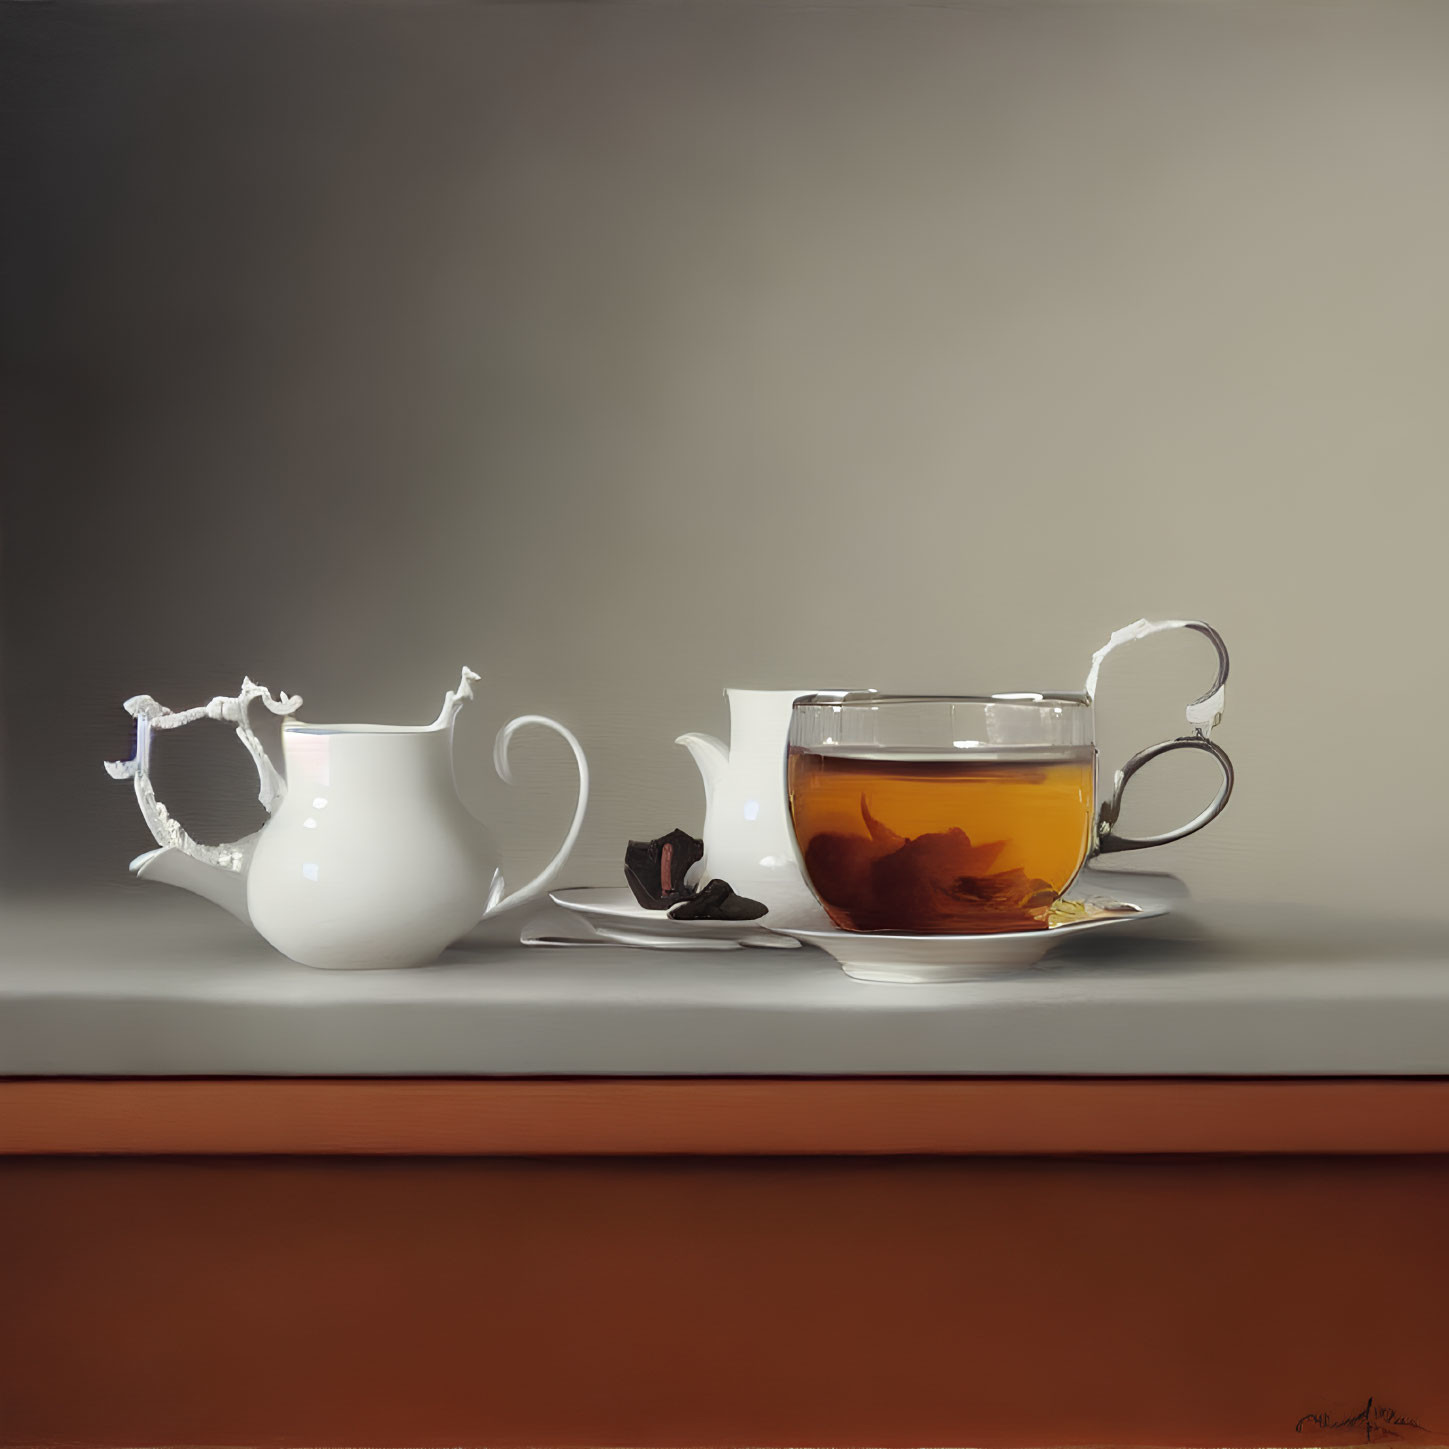 White Teapot, Milk Jug, Tea Cup, and Cookie Still Life on Wooden Table